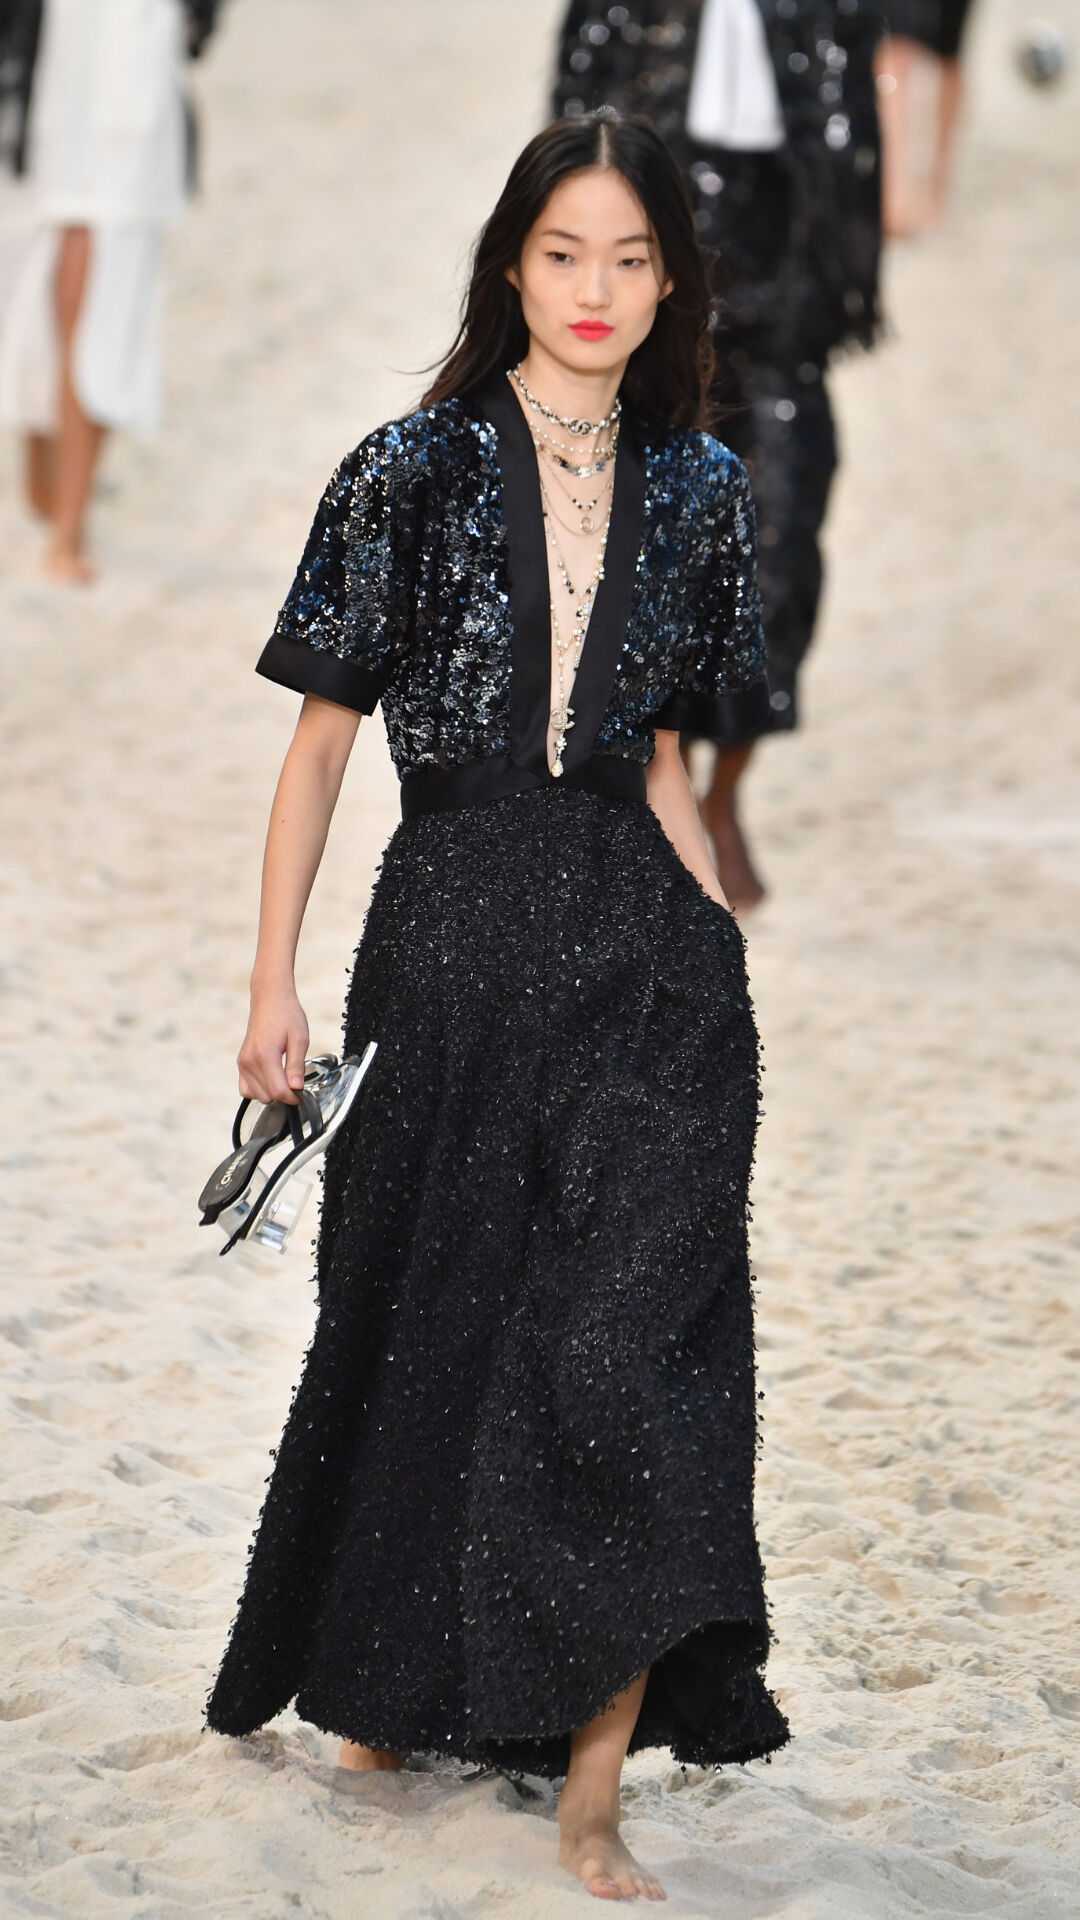 Karl Lagerfeld Turned Le Grand Palais Into A Beach For The Chanel Show